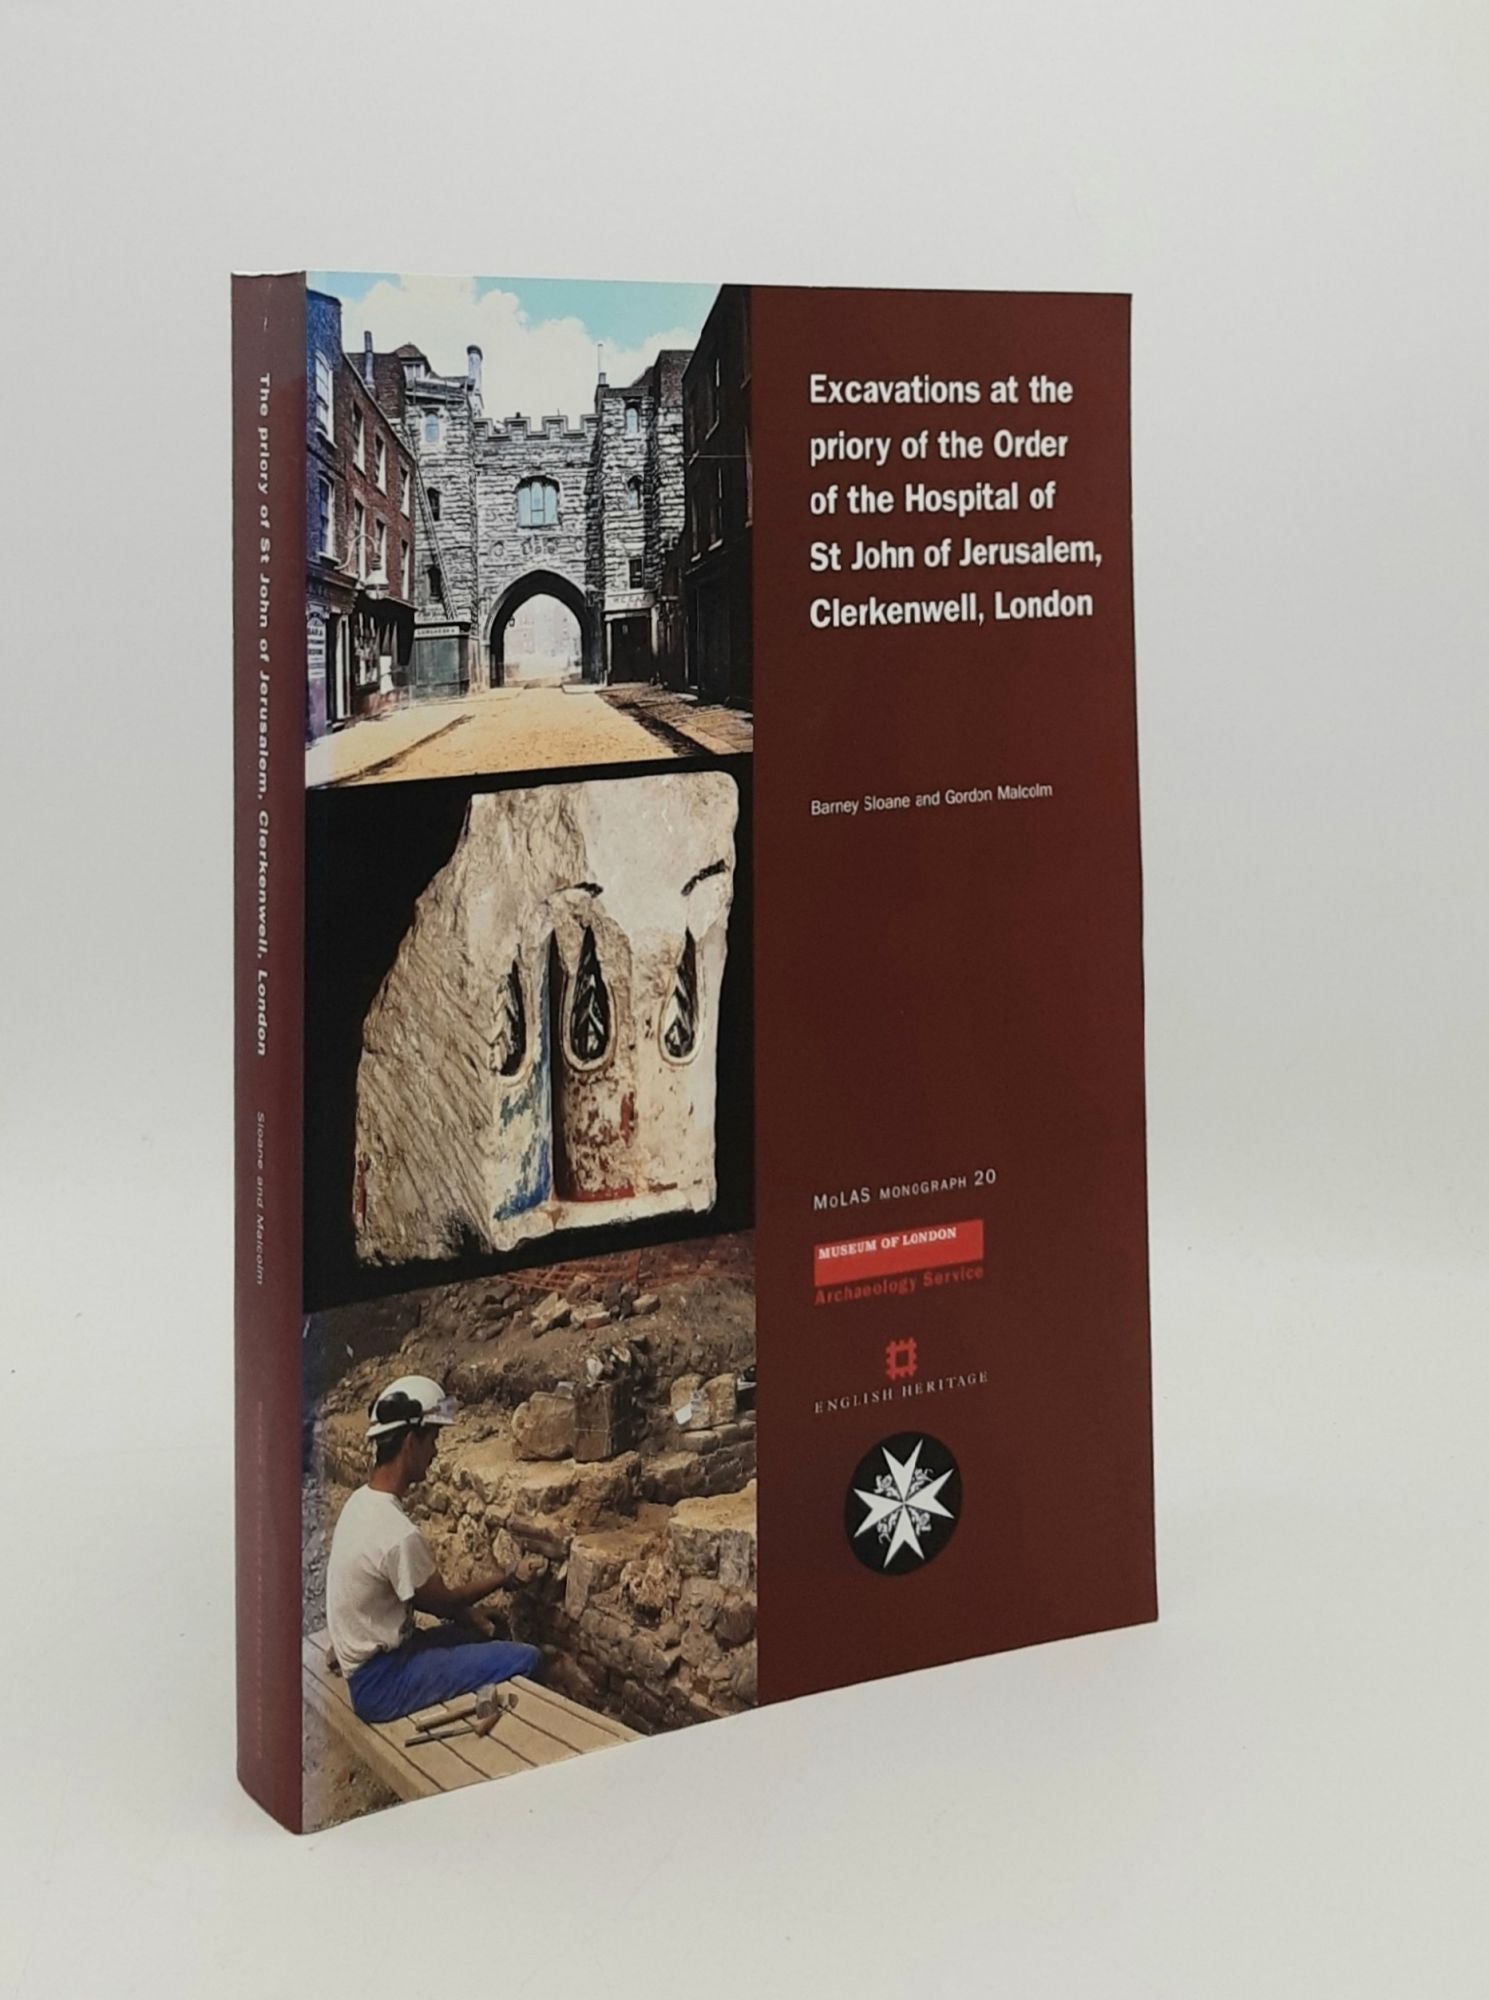 SLOANE Barney, MALCOLM Gordon - Excavations at the Priory of the Order of the Hospital of St John of Jerusalem Clerkenwell London (Molas Monograph 20)